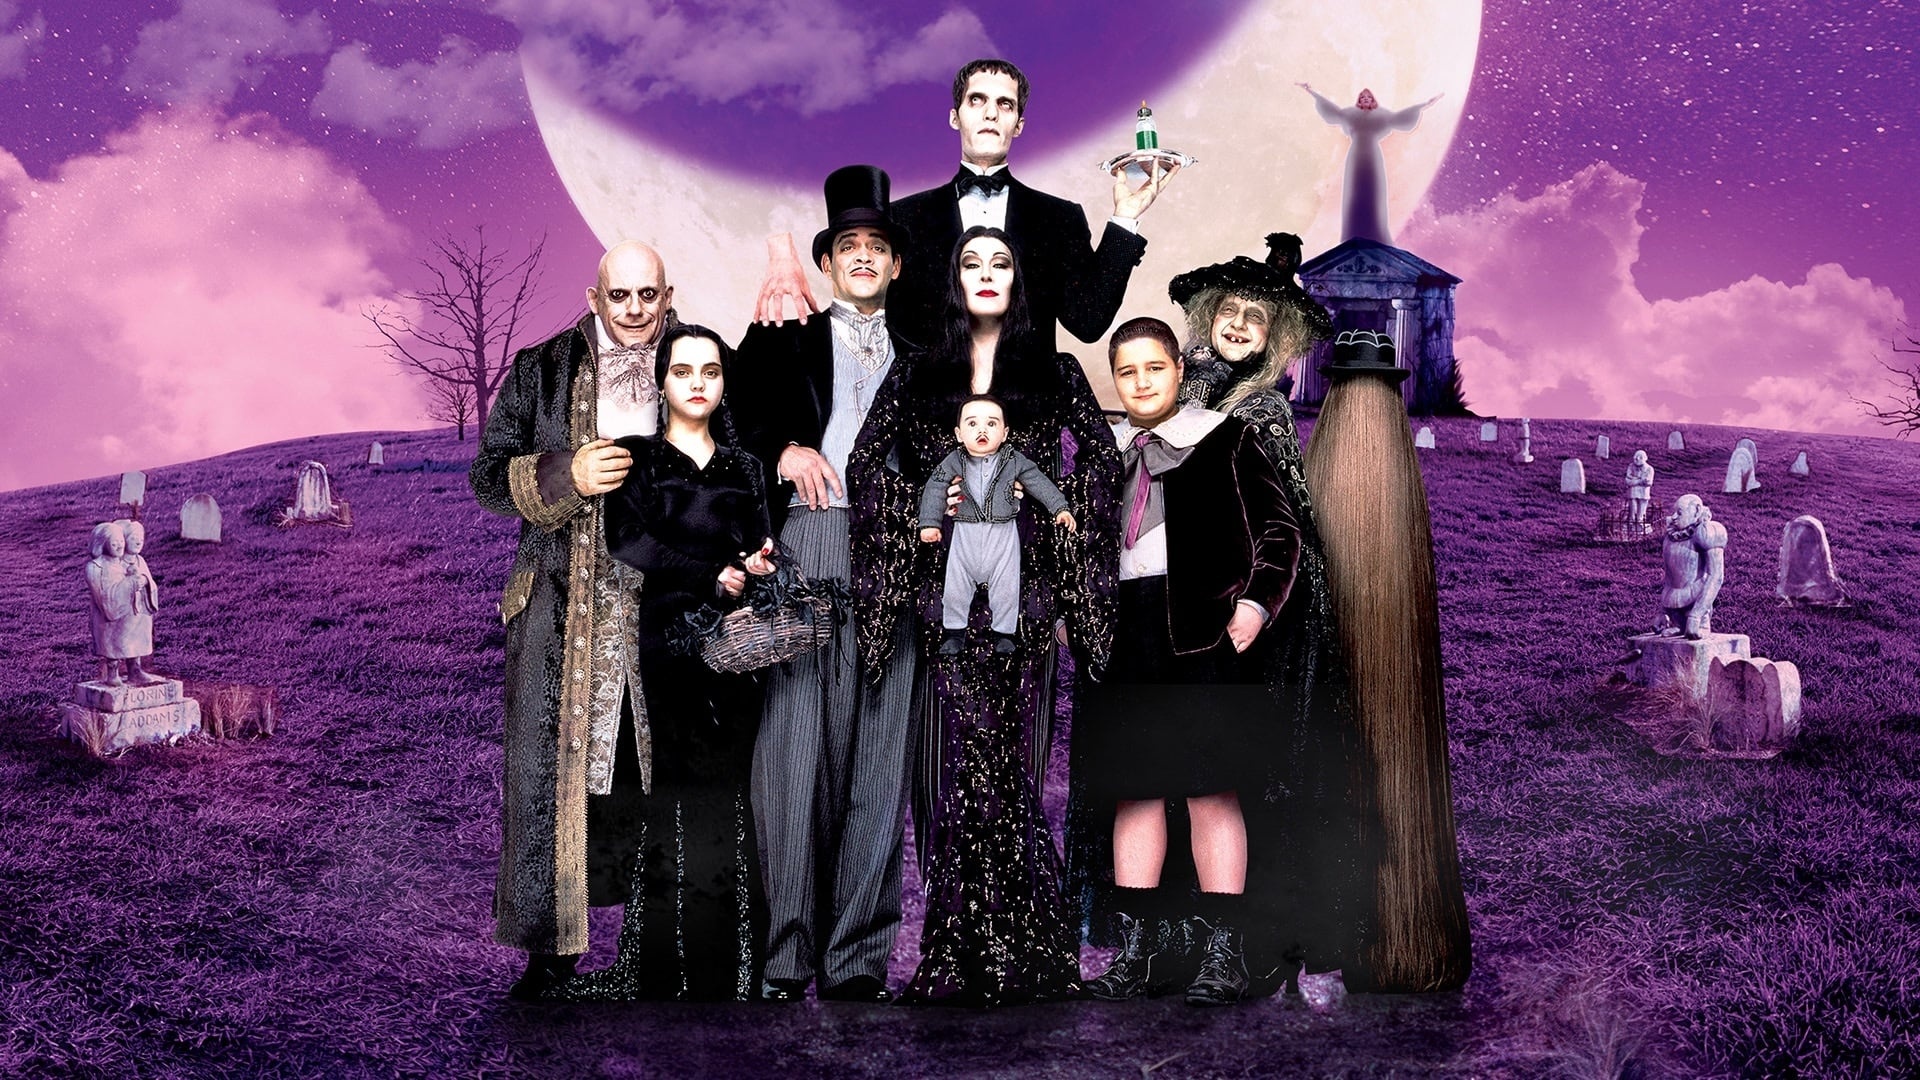 Addams Family, Movie posters, Values, The Movie Database, 1920x1080 Full HD Desktop